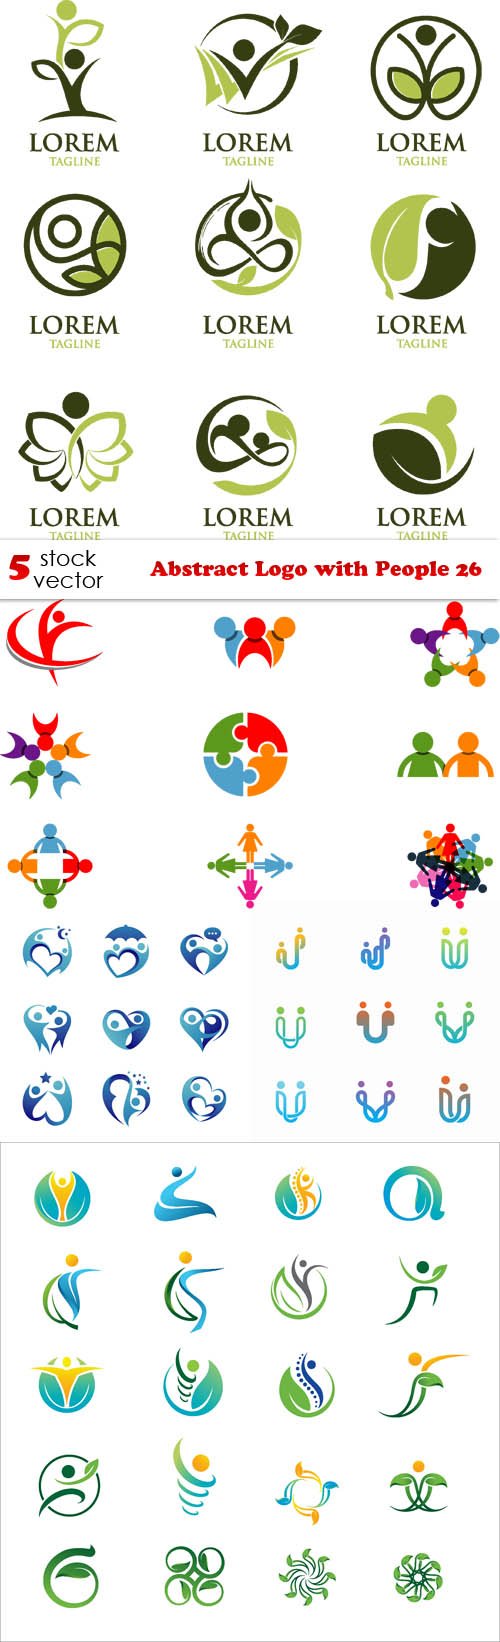 Vectors - Abstract Logo with People 26